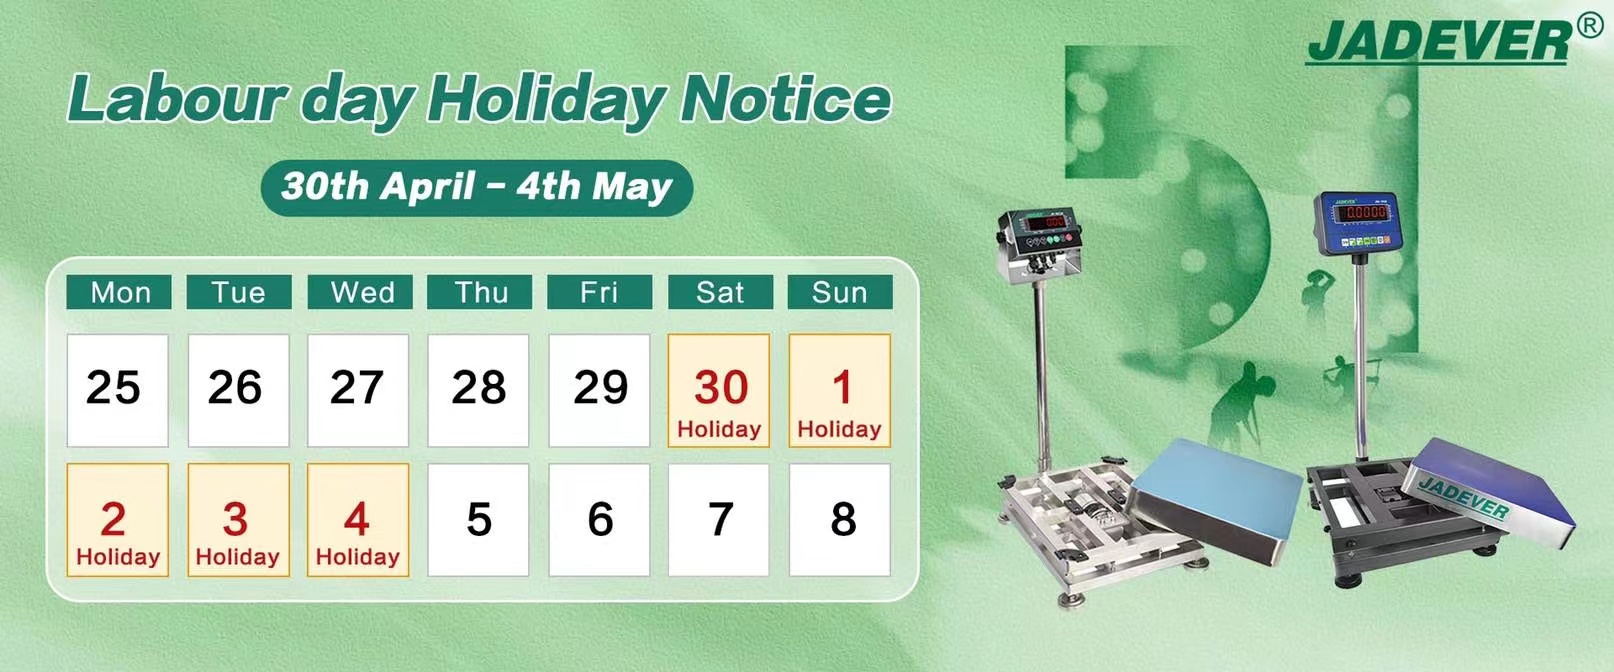 Holiday Notice - Labour Day